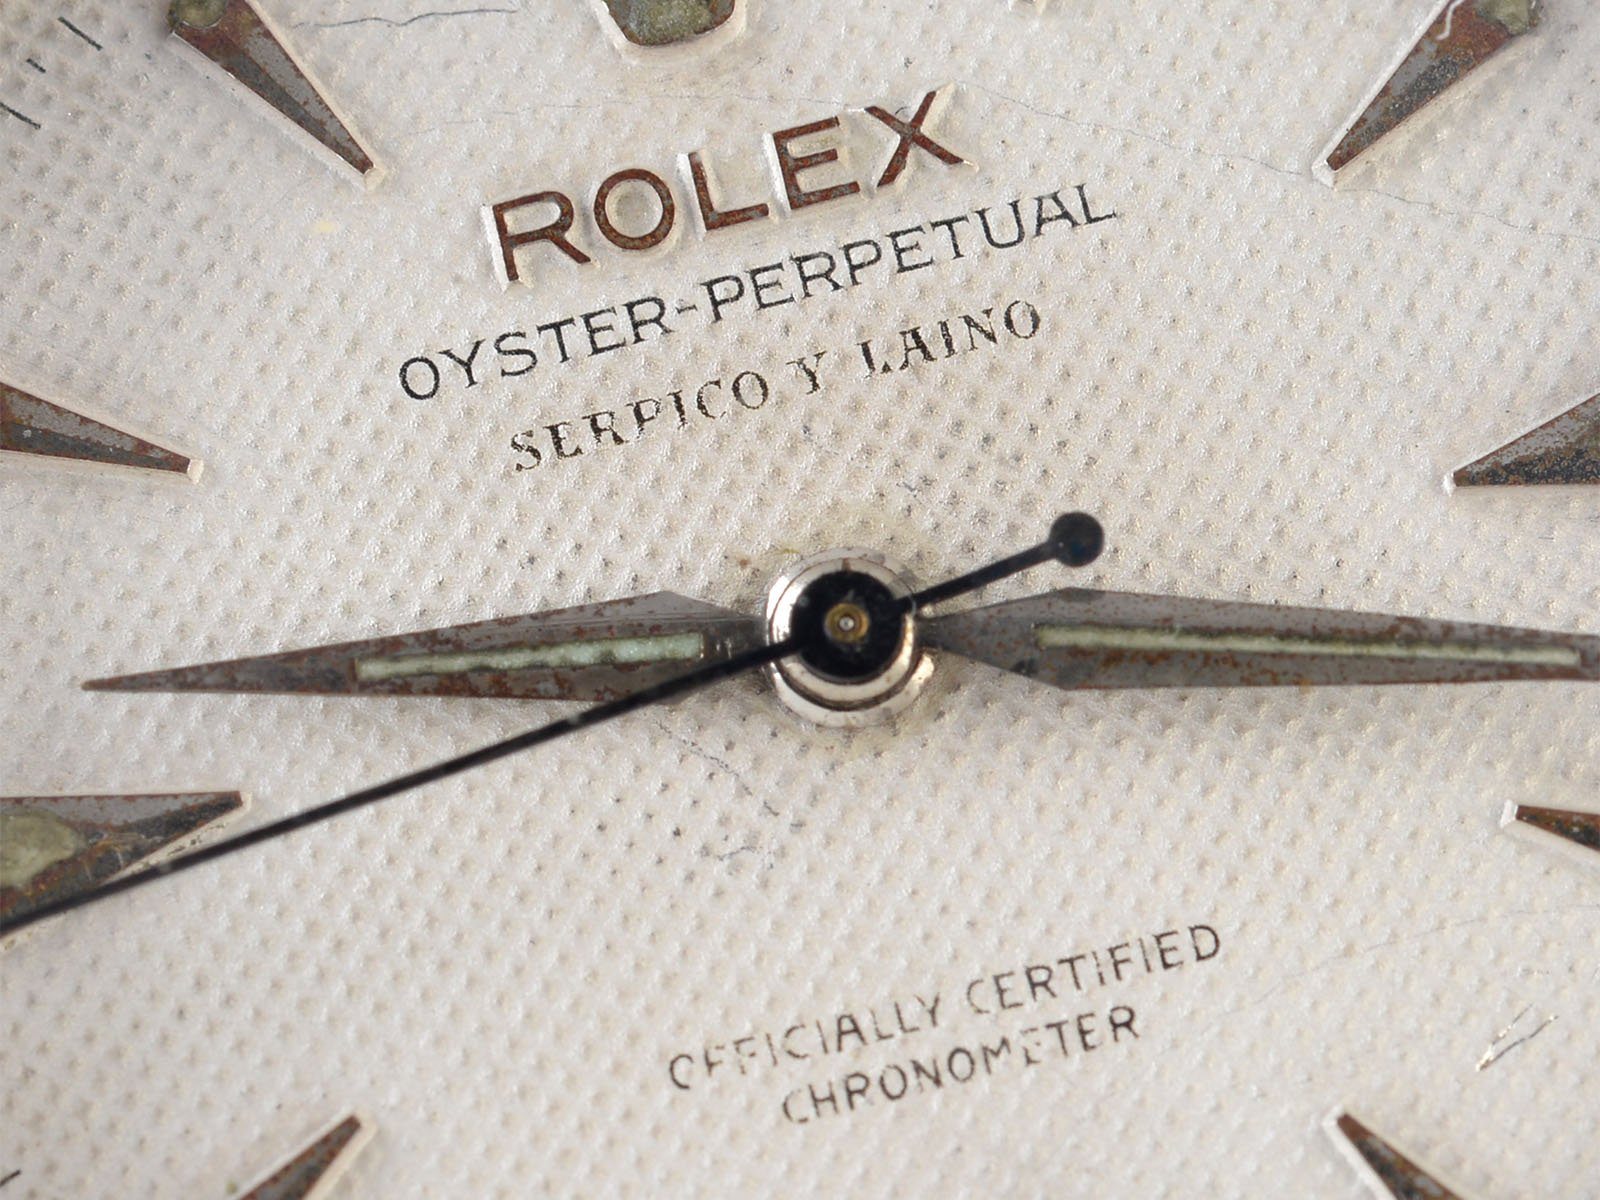 ROLEX OYSTER PERPETUAL SERPICO Y LAINO HONEYCOMB DIAL